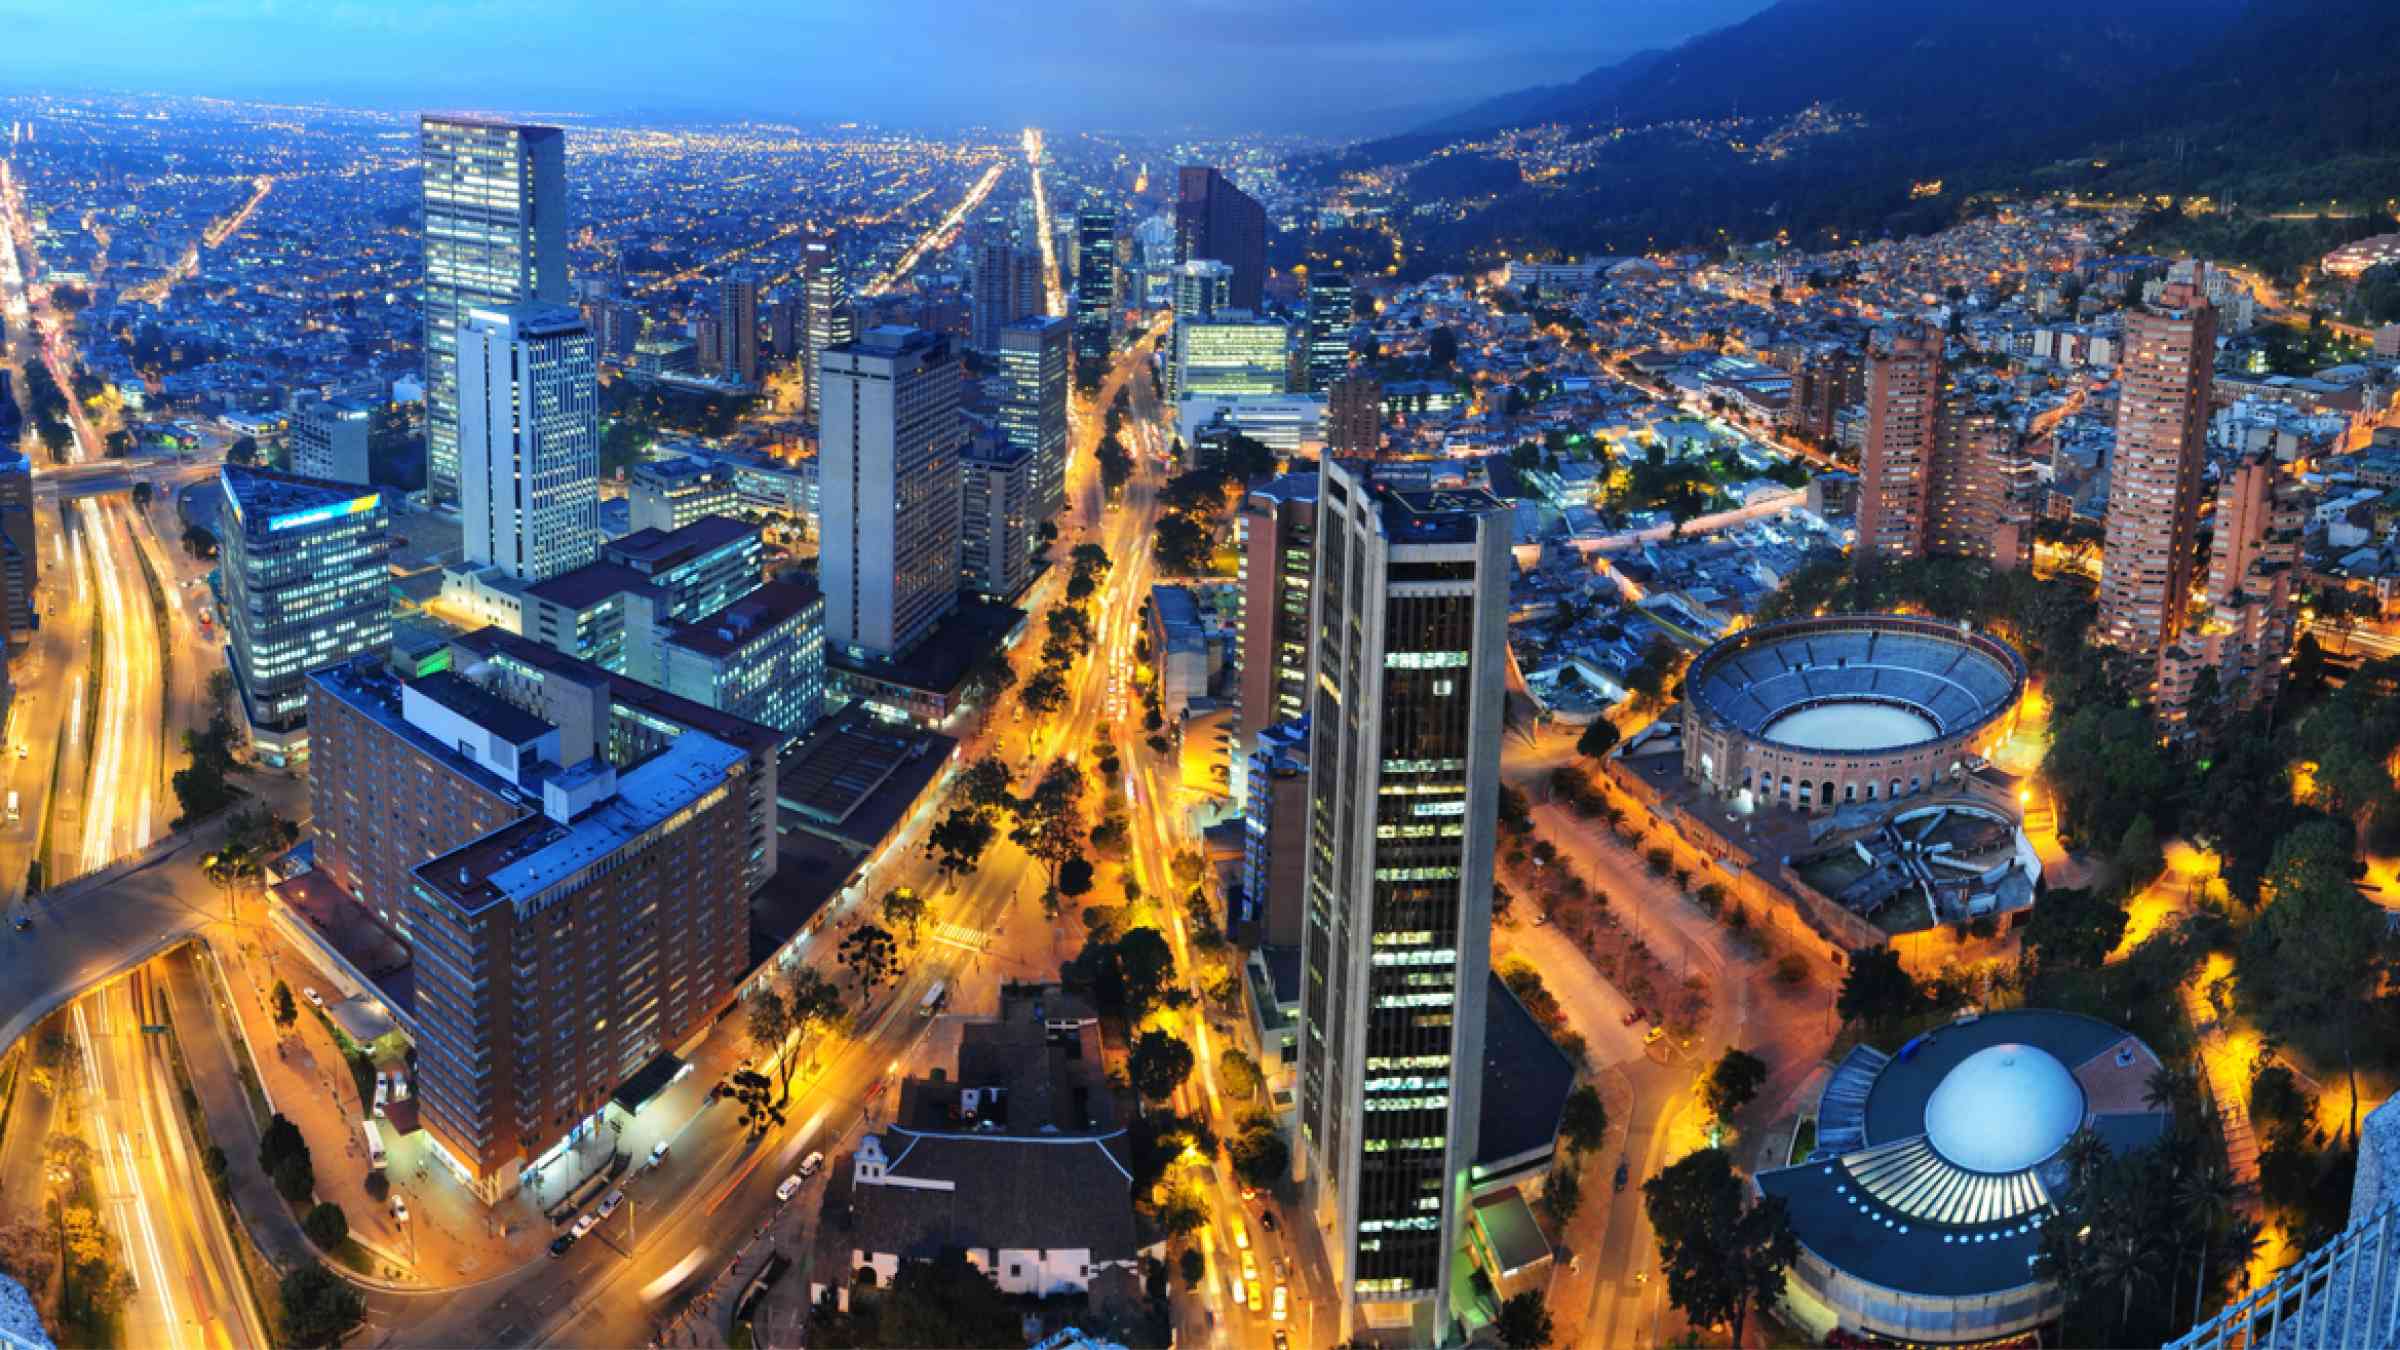 A panoramic view of downtown Bogotá at night